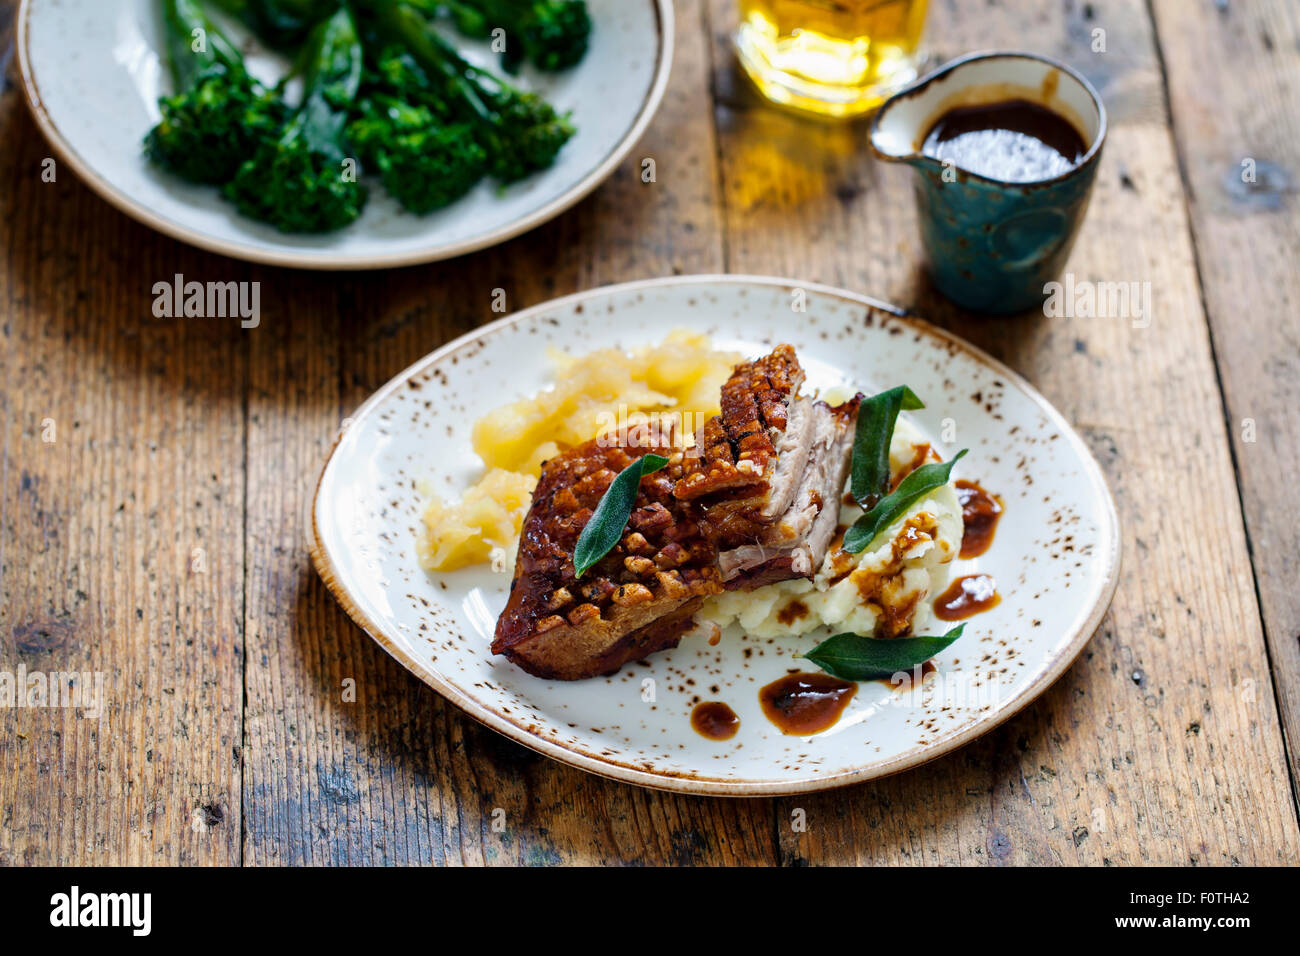 Pork belly with crackling, mashed potatoes, apple sauce and deep fried sage leaves Stock Photo